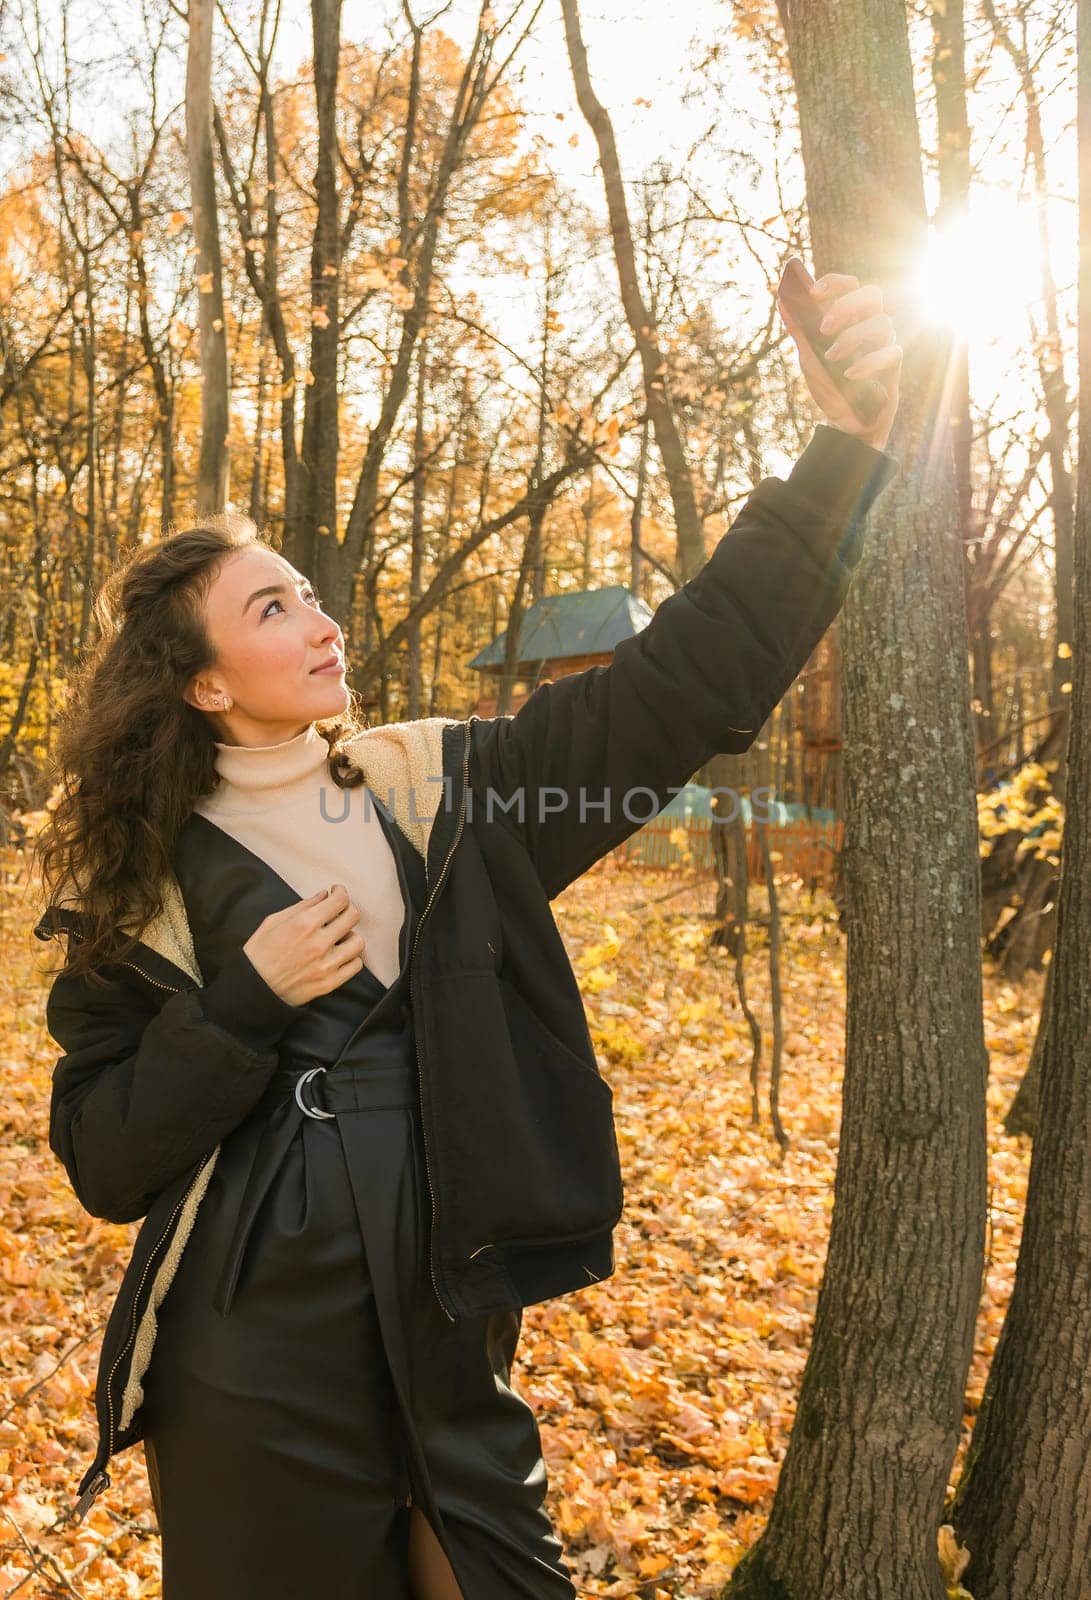 Attractive young woman walking in autumn park, happy mood and fashion style trend and curly long brown hair. Fall season and pretty female portrait copy space. Millennial generation concept by Satura86